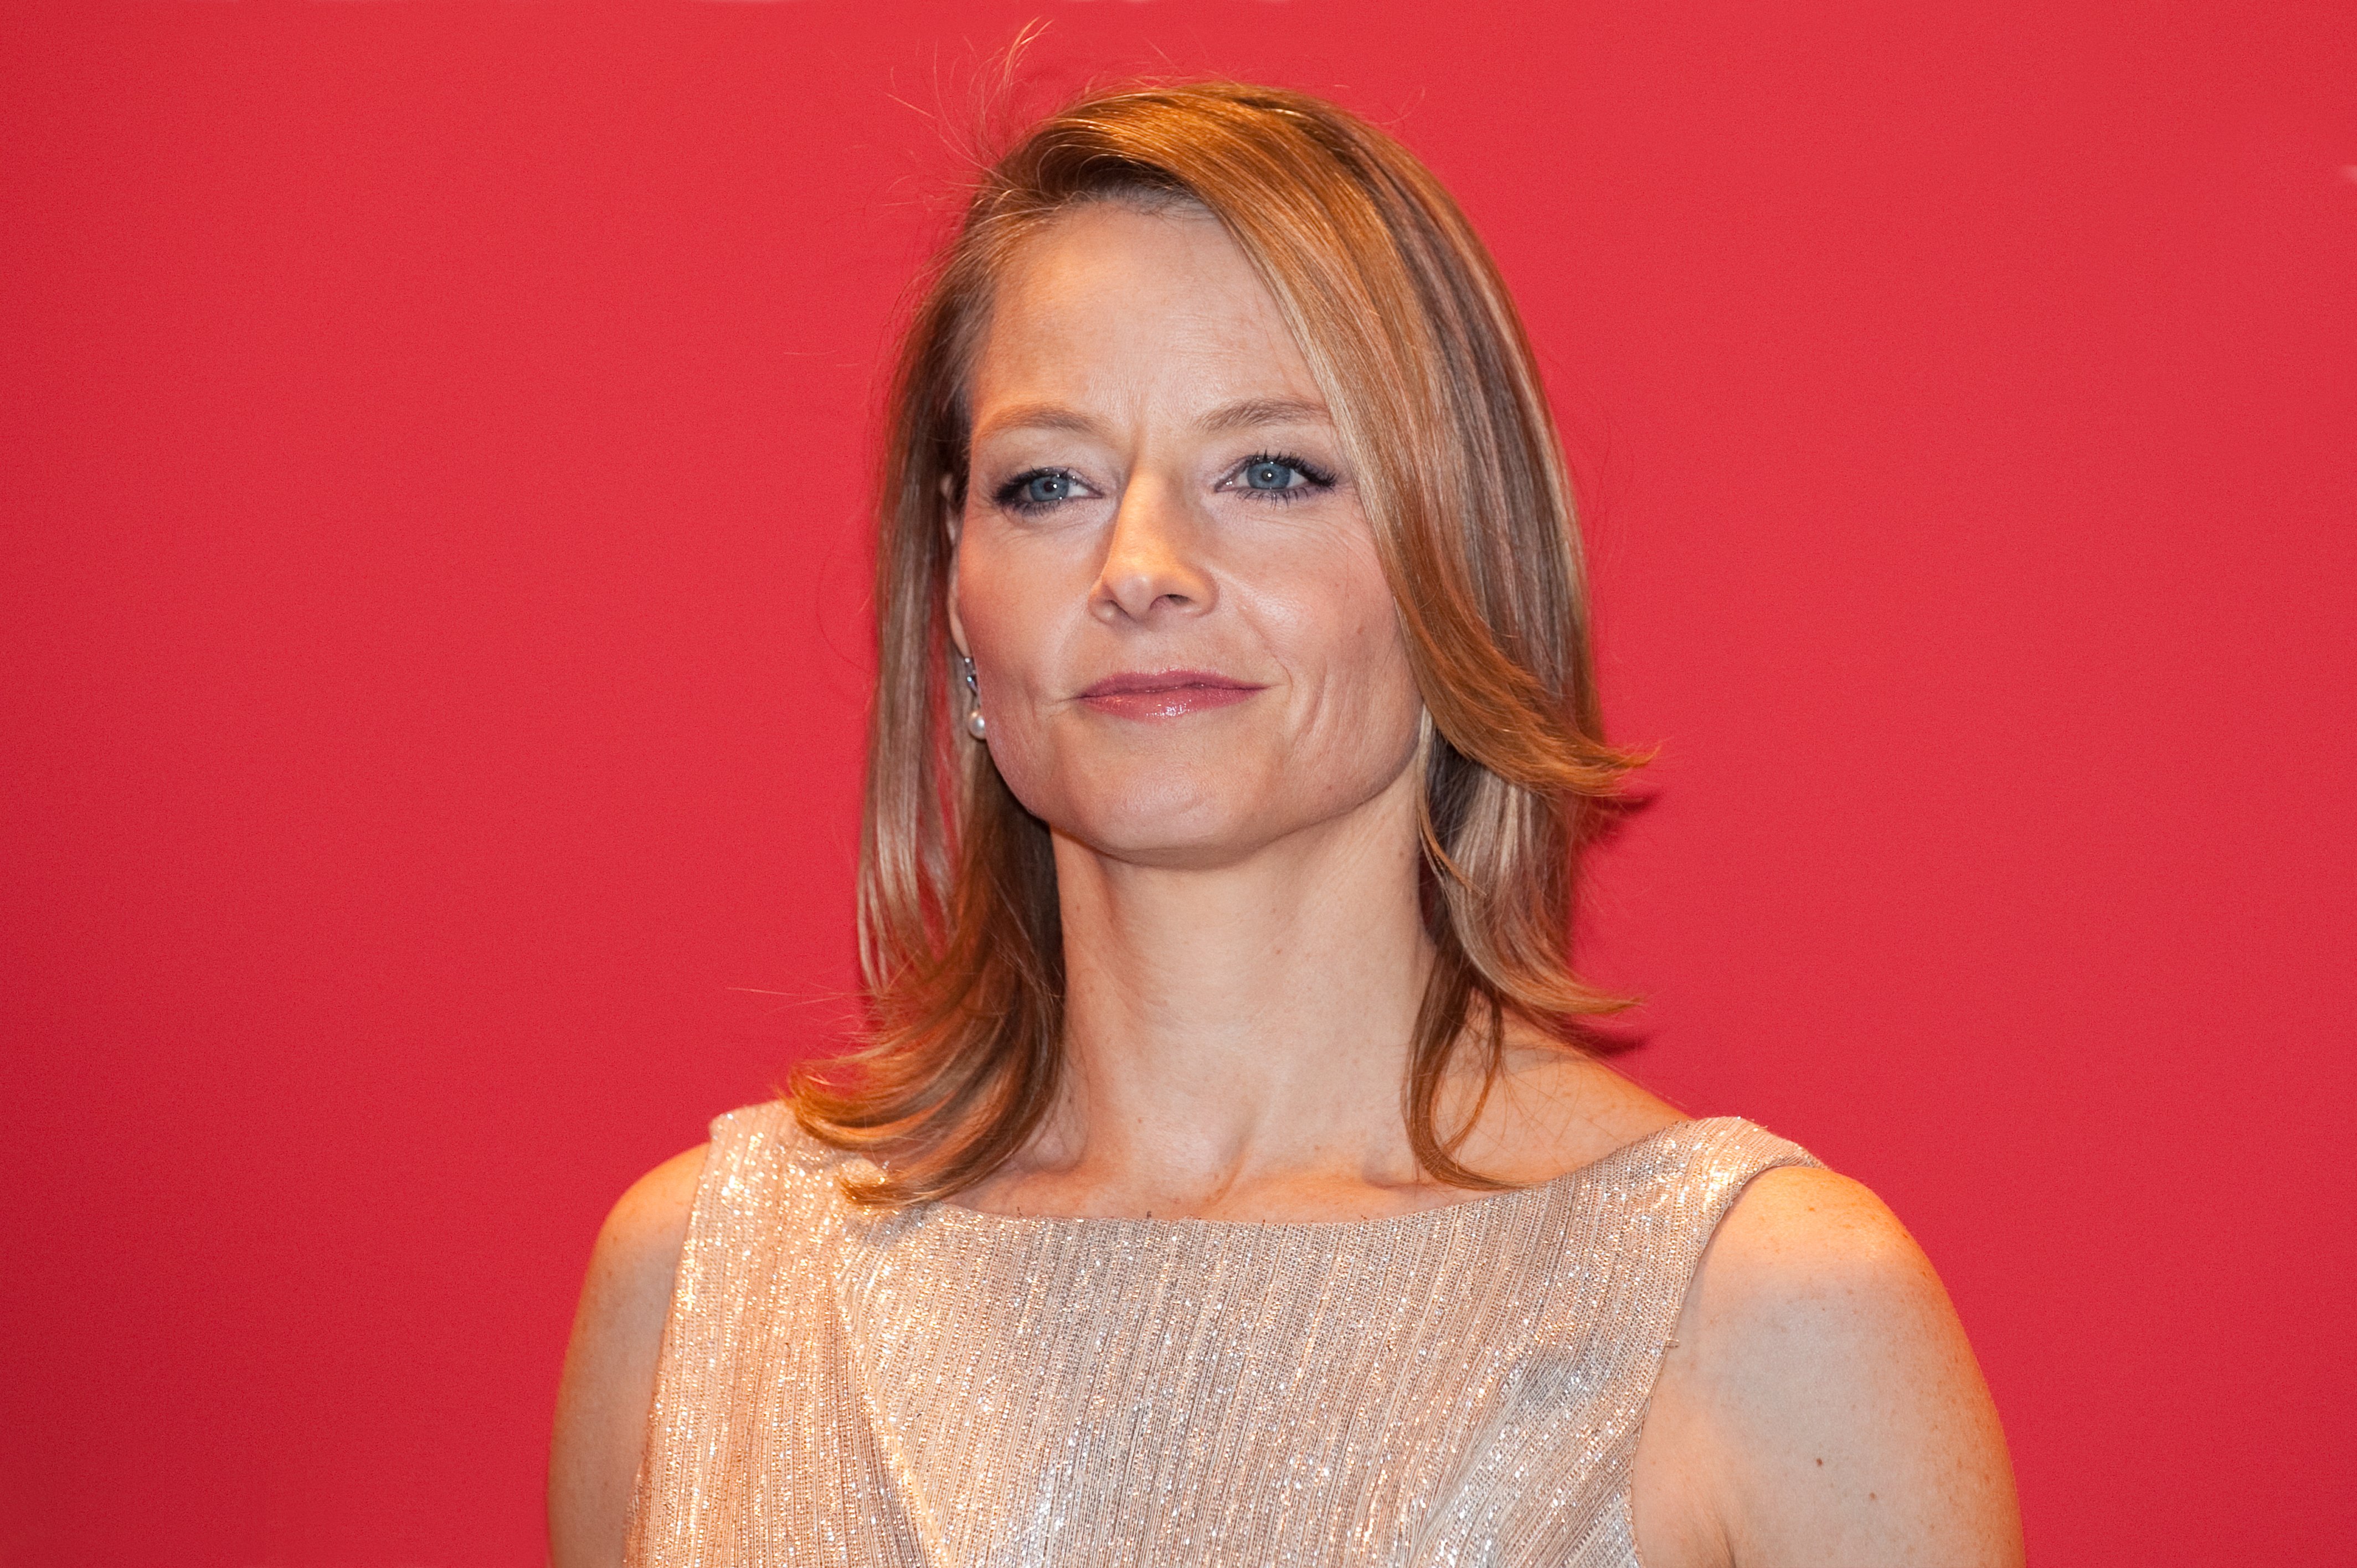 Jodie Foster attending the Cesar Awards in Paris, February, 2011. | Photo: Shutterstock.